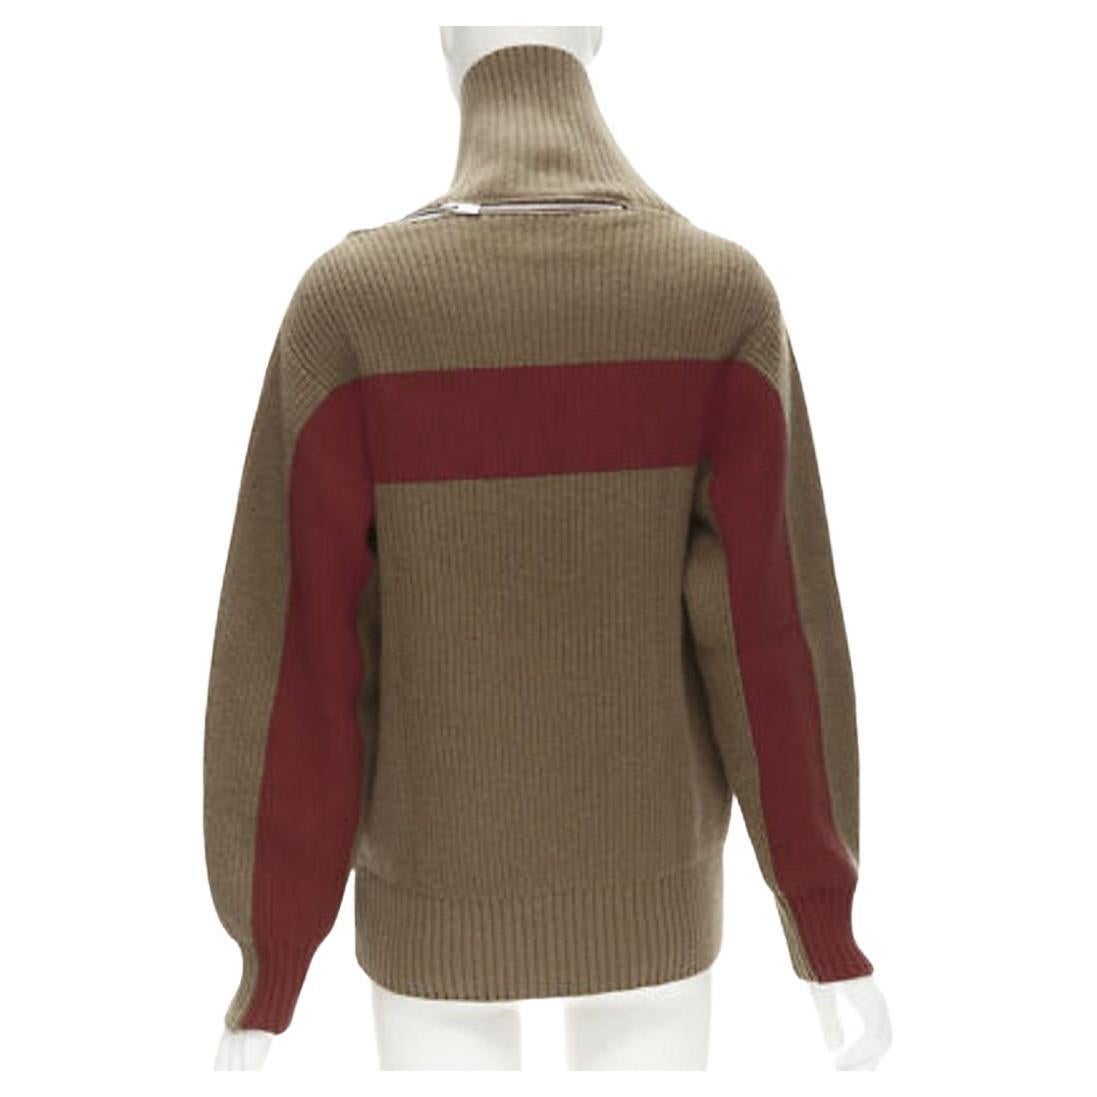 SACAI 2019 100% wool brown zip collar red striped back turtleneck sweater JP1 S
Reference: KNLM/A00087
Brand: Sacai
Designer: Chitose Abe
Collection: 2019
Material: Wool
Color: Brown, Red
Pattern: Solid
Closure: Zip
Extra Details: Logo signed zipped